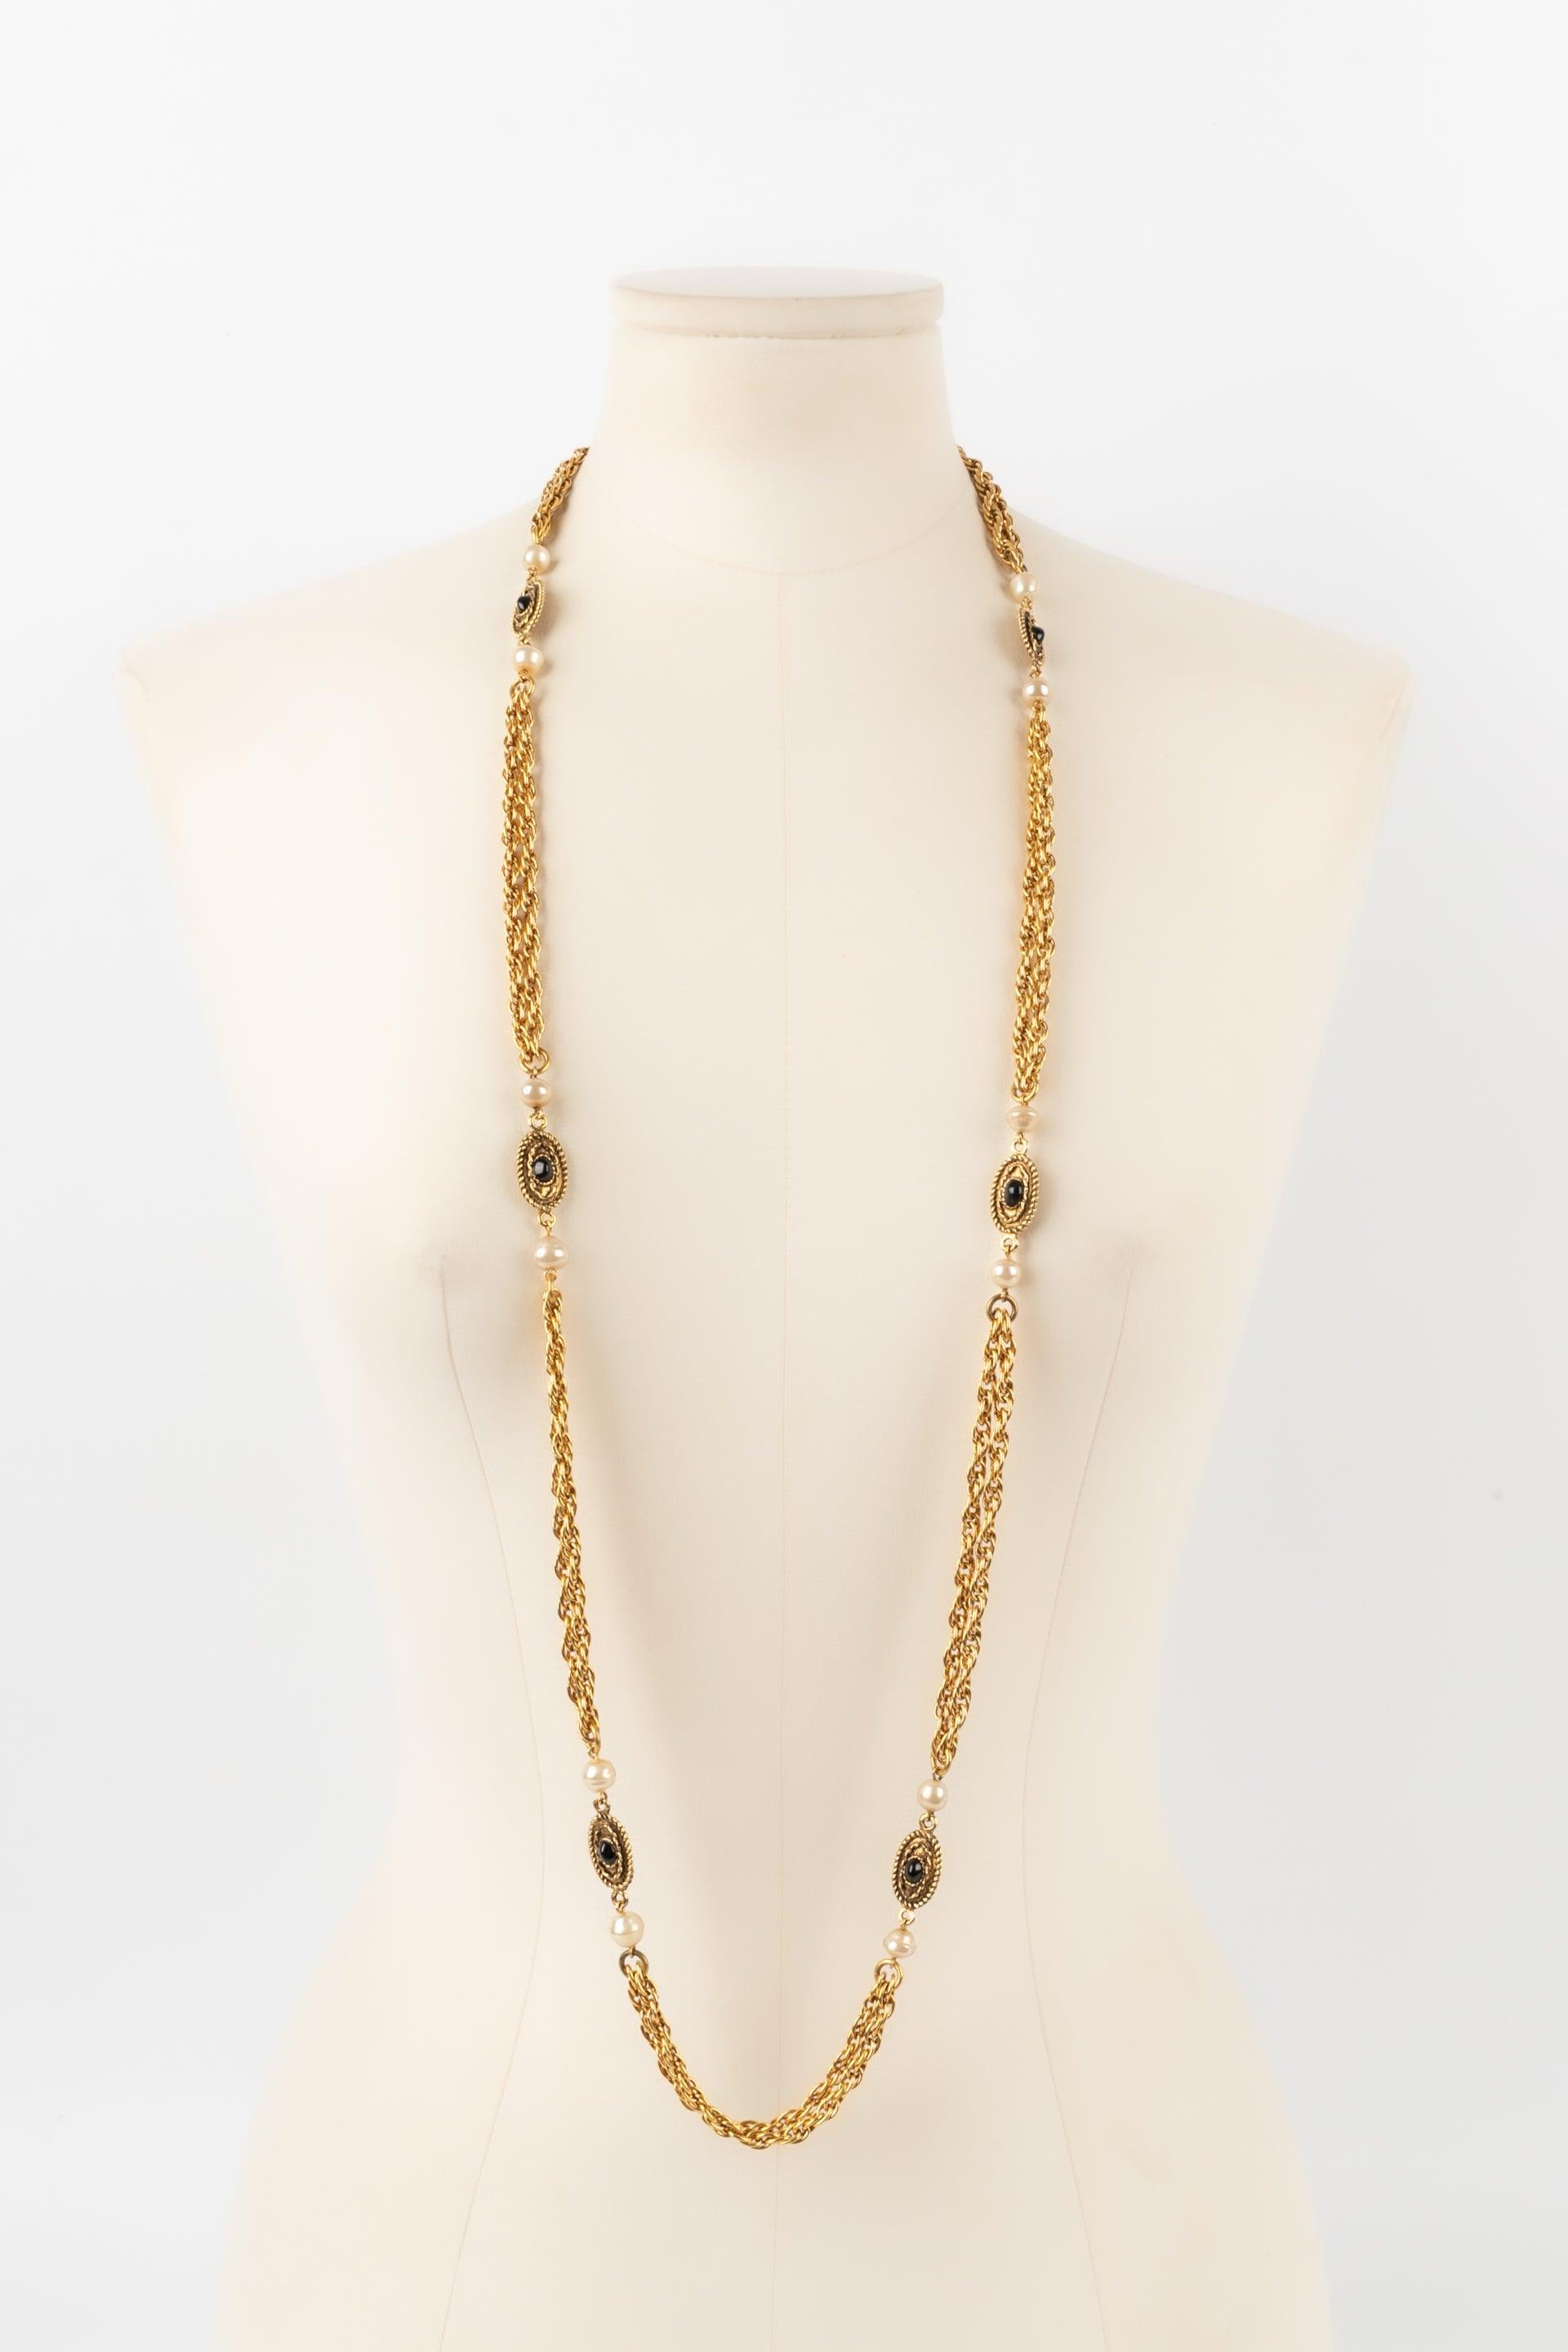 Chanel - (Made in France) Golden metal necklace/sautoir with costume pearls and tiny glass paste cabochons. 1982 Collection.

Additional information:
Condition: Very good condition
Dimensions: Length: 111 cm

Seller Reference: CB212